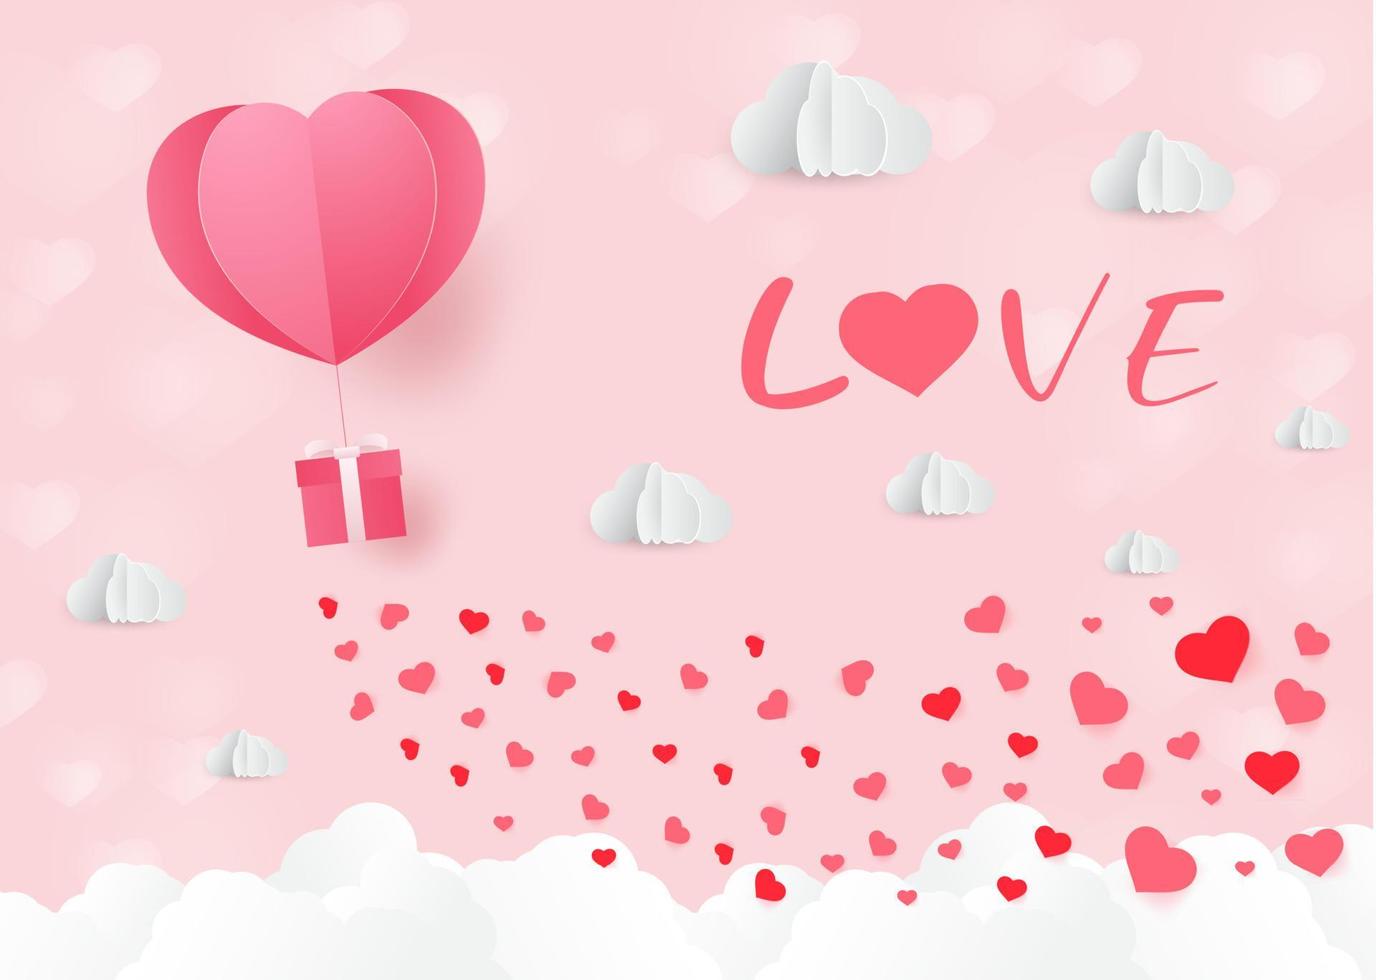 a heart shape. paper art style. valentine day. Origami made hot air balloon vector